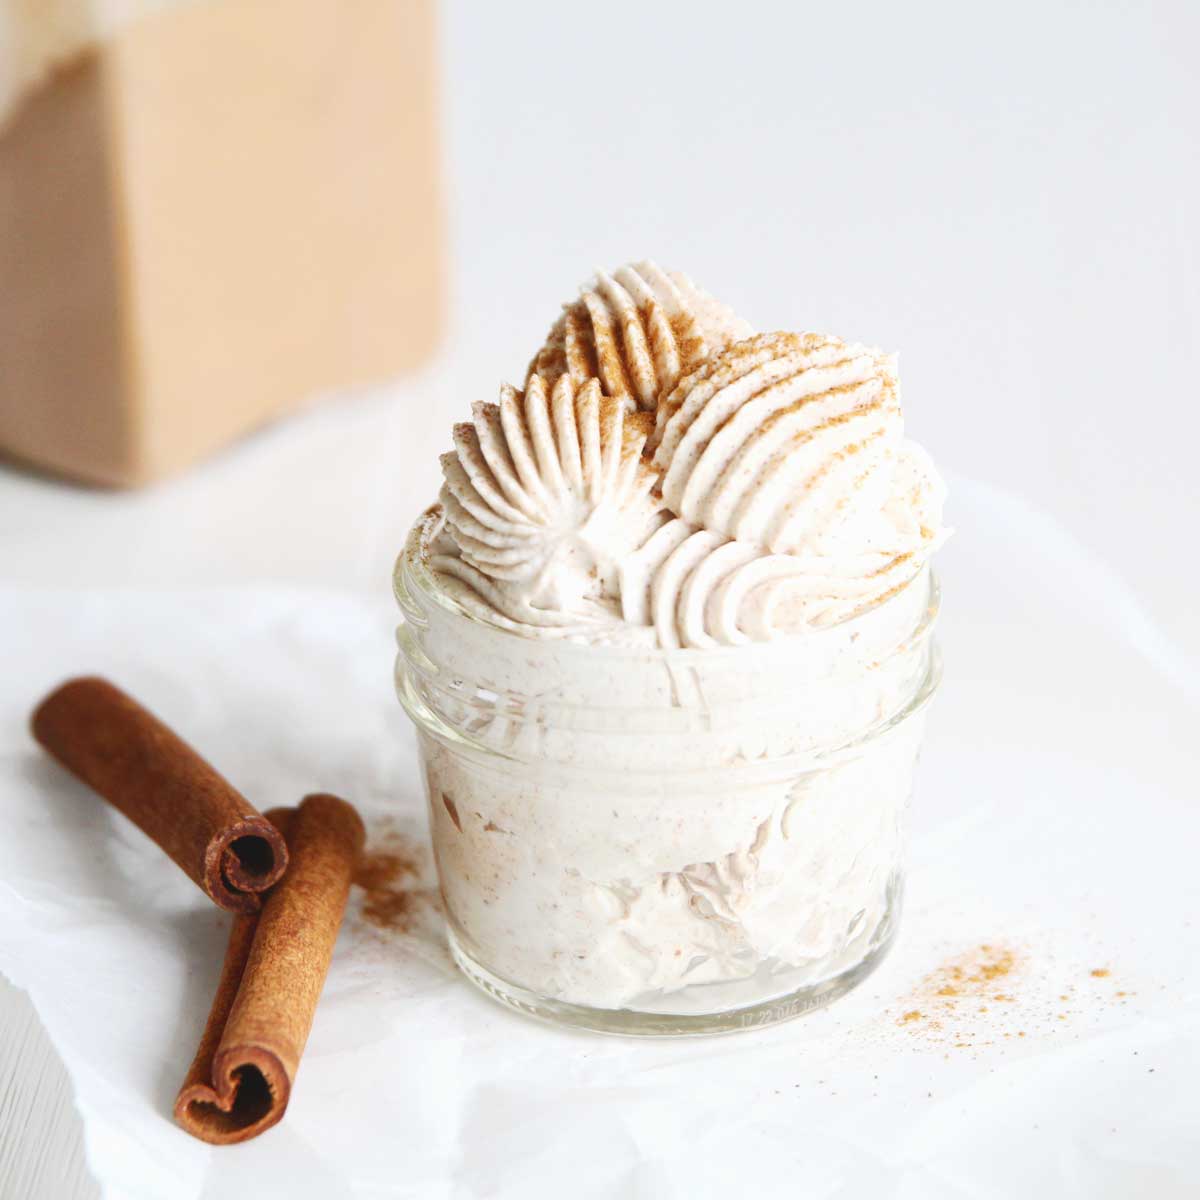 Sweet & Spicy Cinnamon Whipped Cream Recipe (Stabilized with Cream Cheese) - Nutella Chocolate Whipped Cream